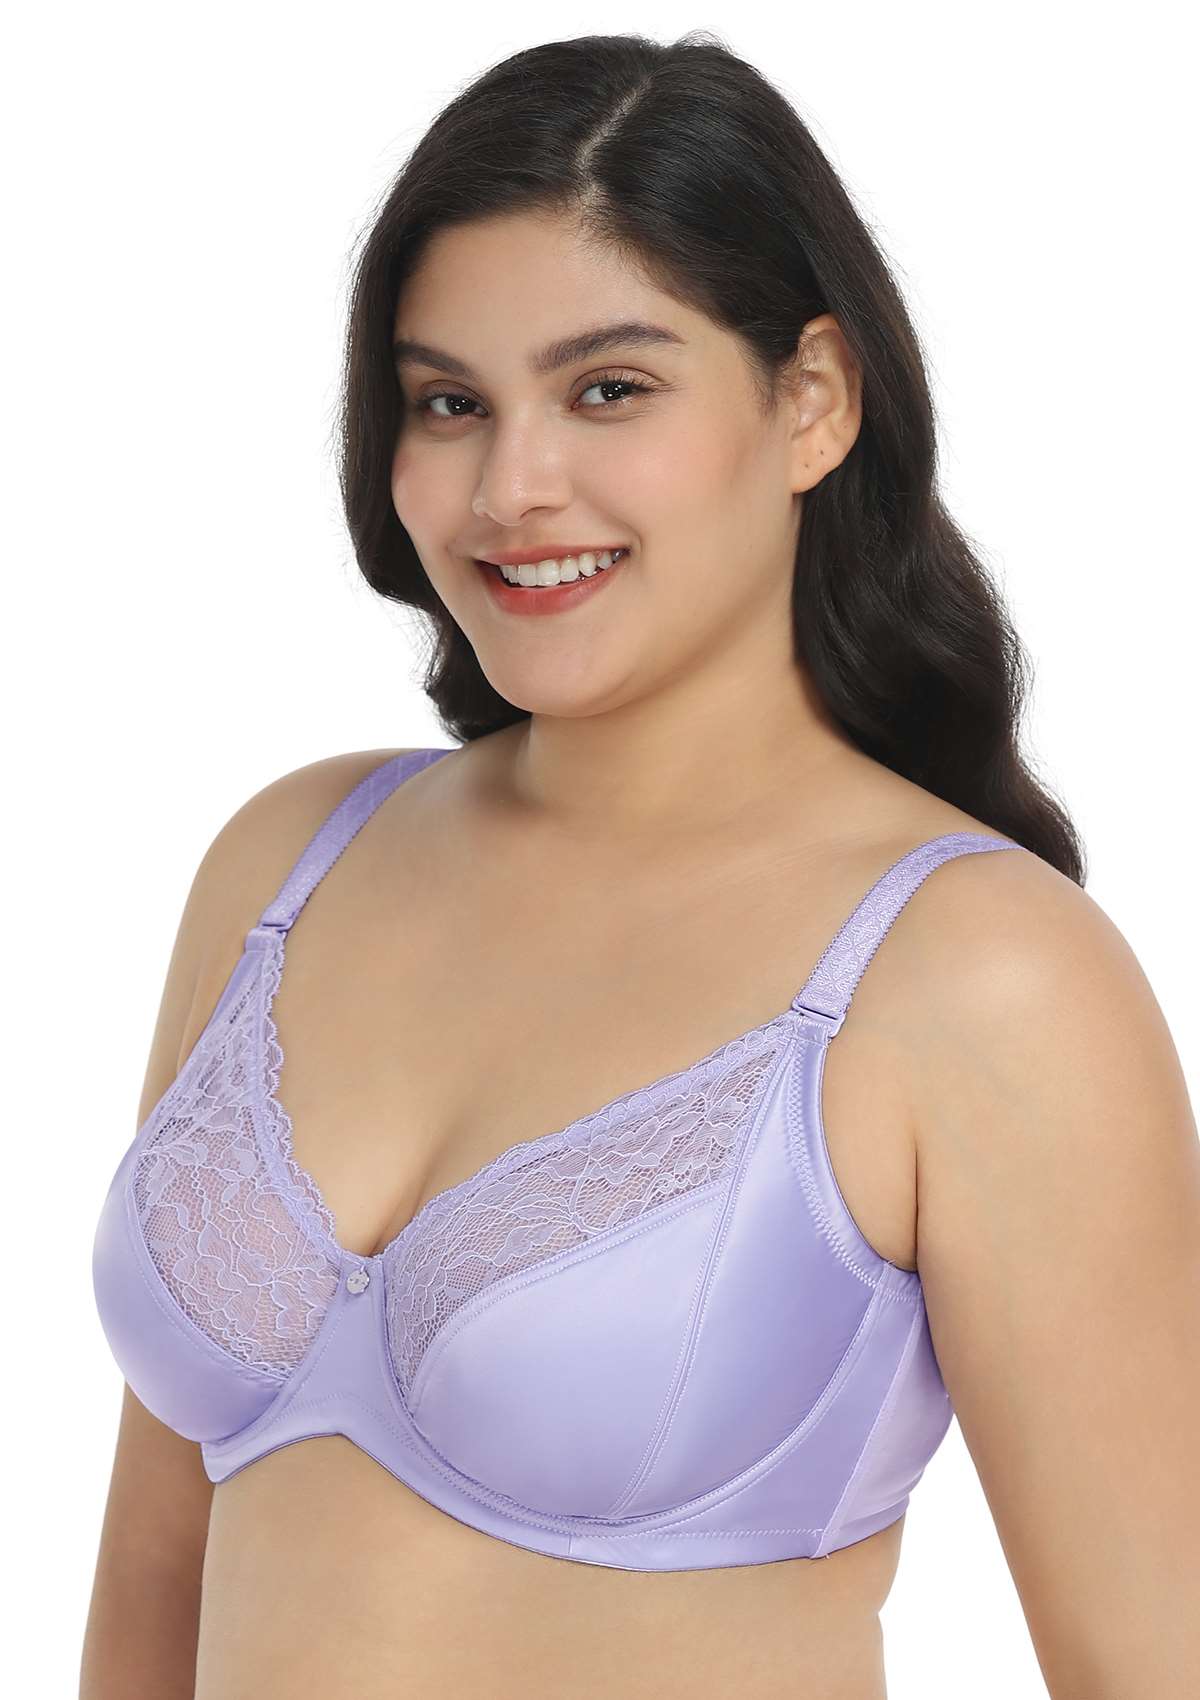 HSIA Foxy Satin Smooth Floral Lace Full Coverage Underwire Bra Set - Purple / 40 / D